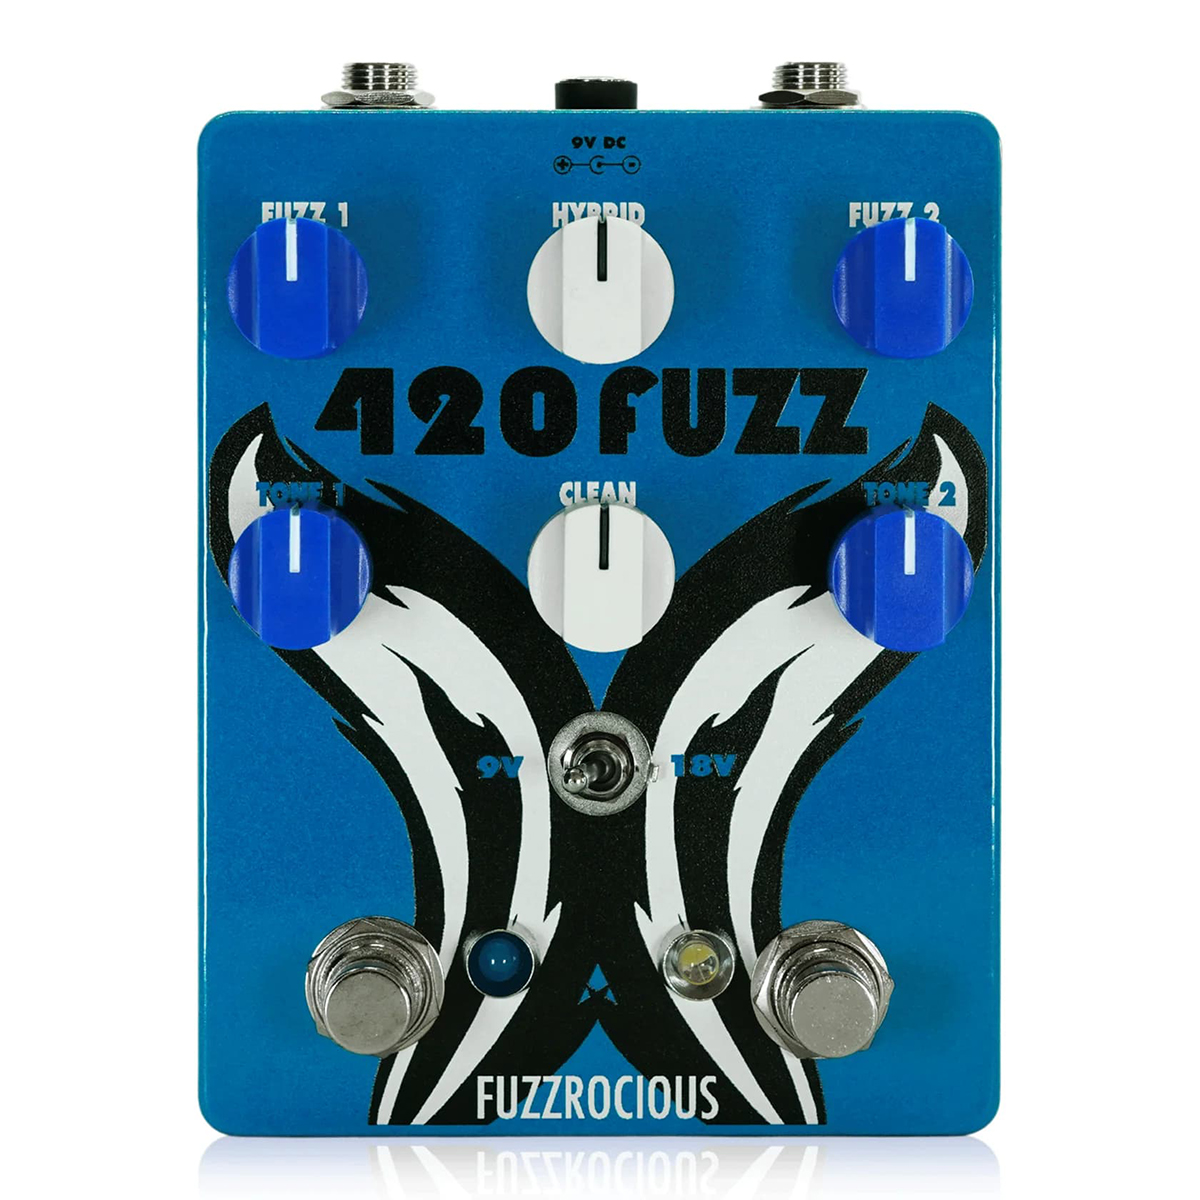 Fuzzrocious Pedals 420 FUZZ v2 コンパクトエフェクター ファズ